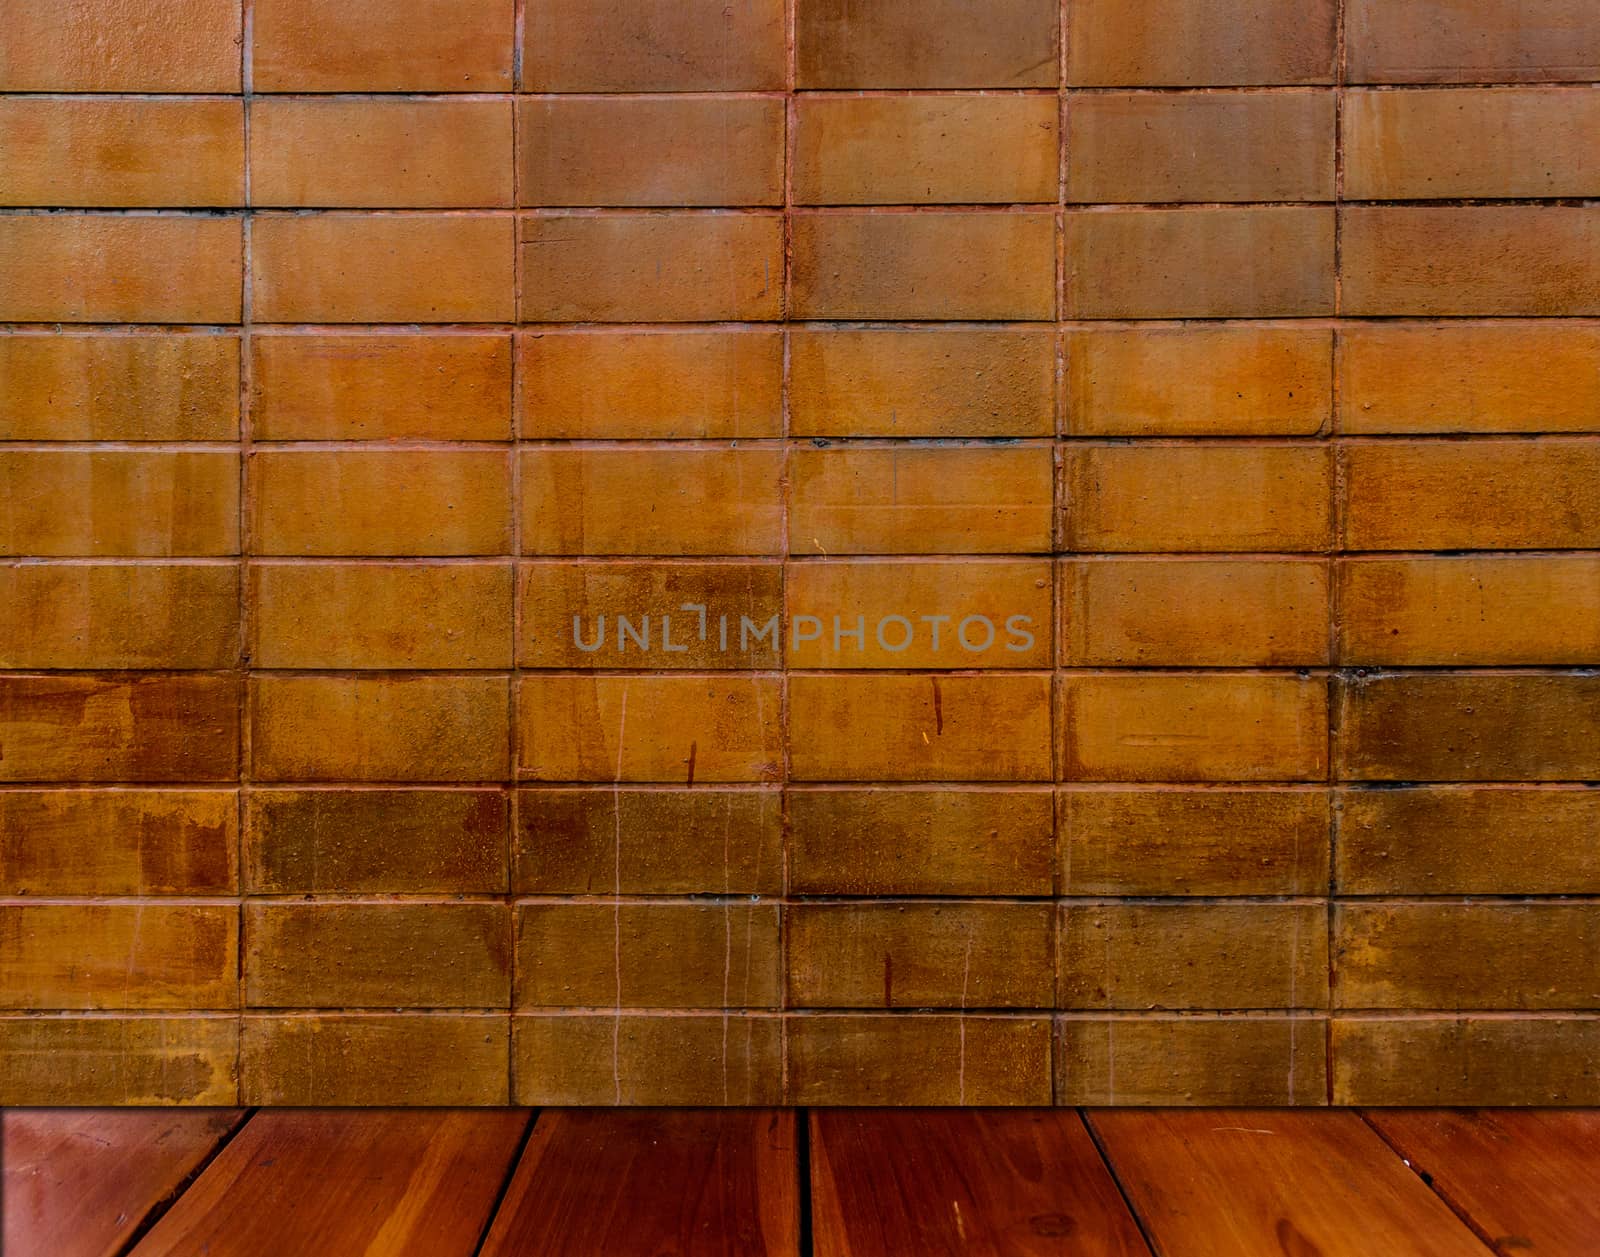 Abstrack Background.The image of bricks and wood flooring as well.